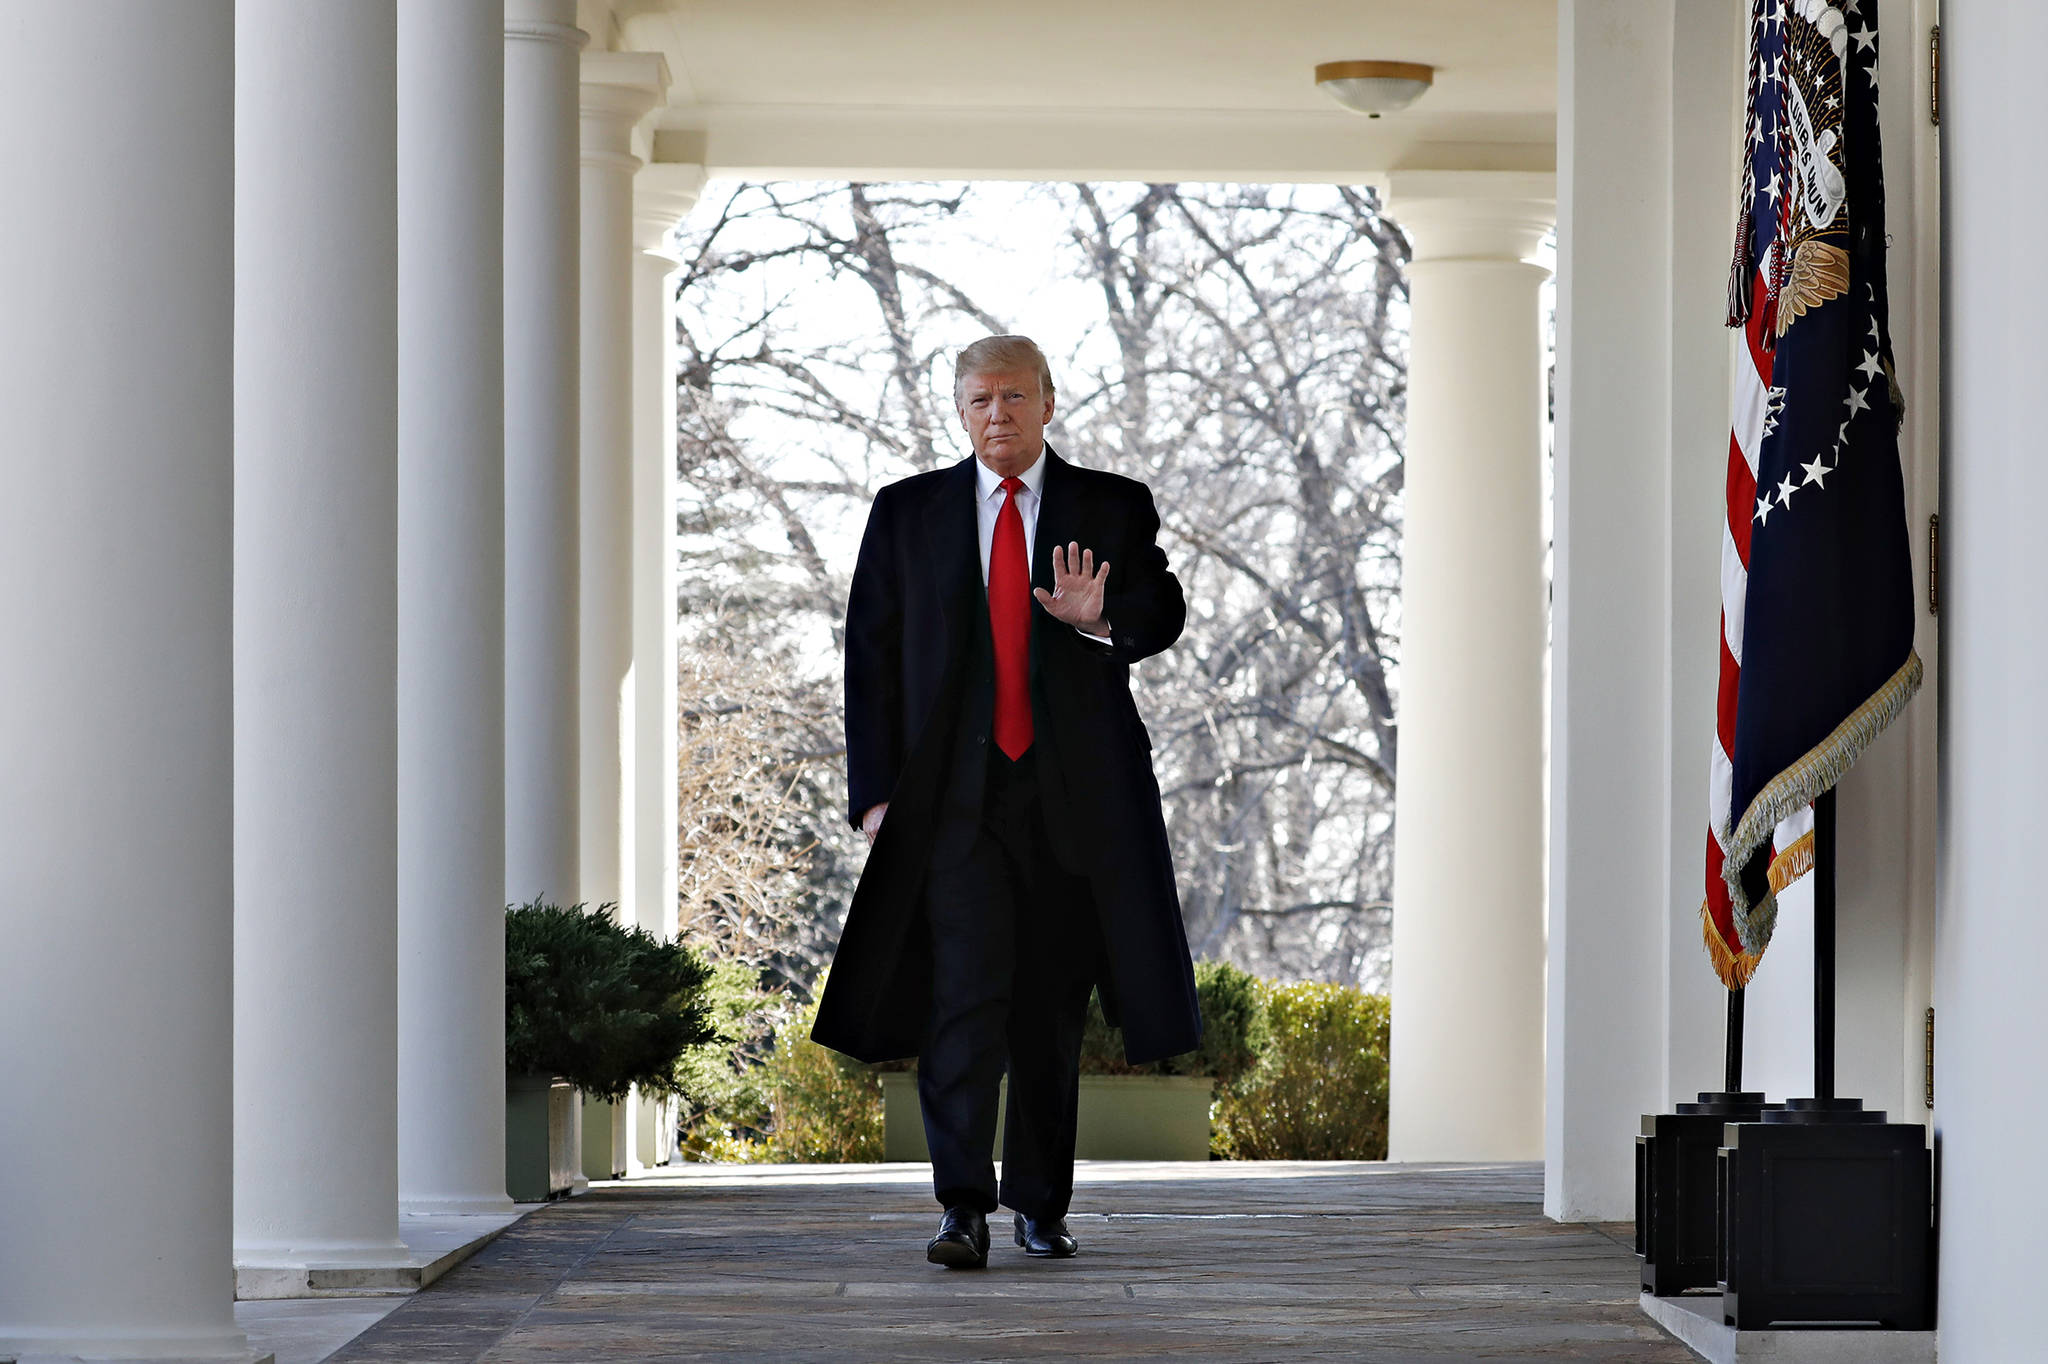 President Donald Trump waves as he walks through the Colonnade from the Oval Office of the White House on arrival to announce a deal to temporarily reopen the government, Friday, Jan. 25, 2019, from the Rose Garden of the White House in Washington. (AP Photo | Jacquelyn Martin)